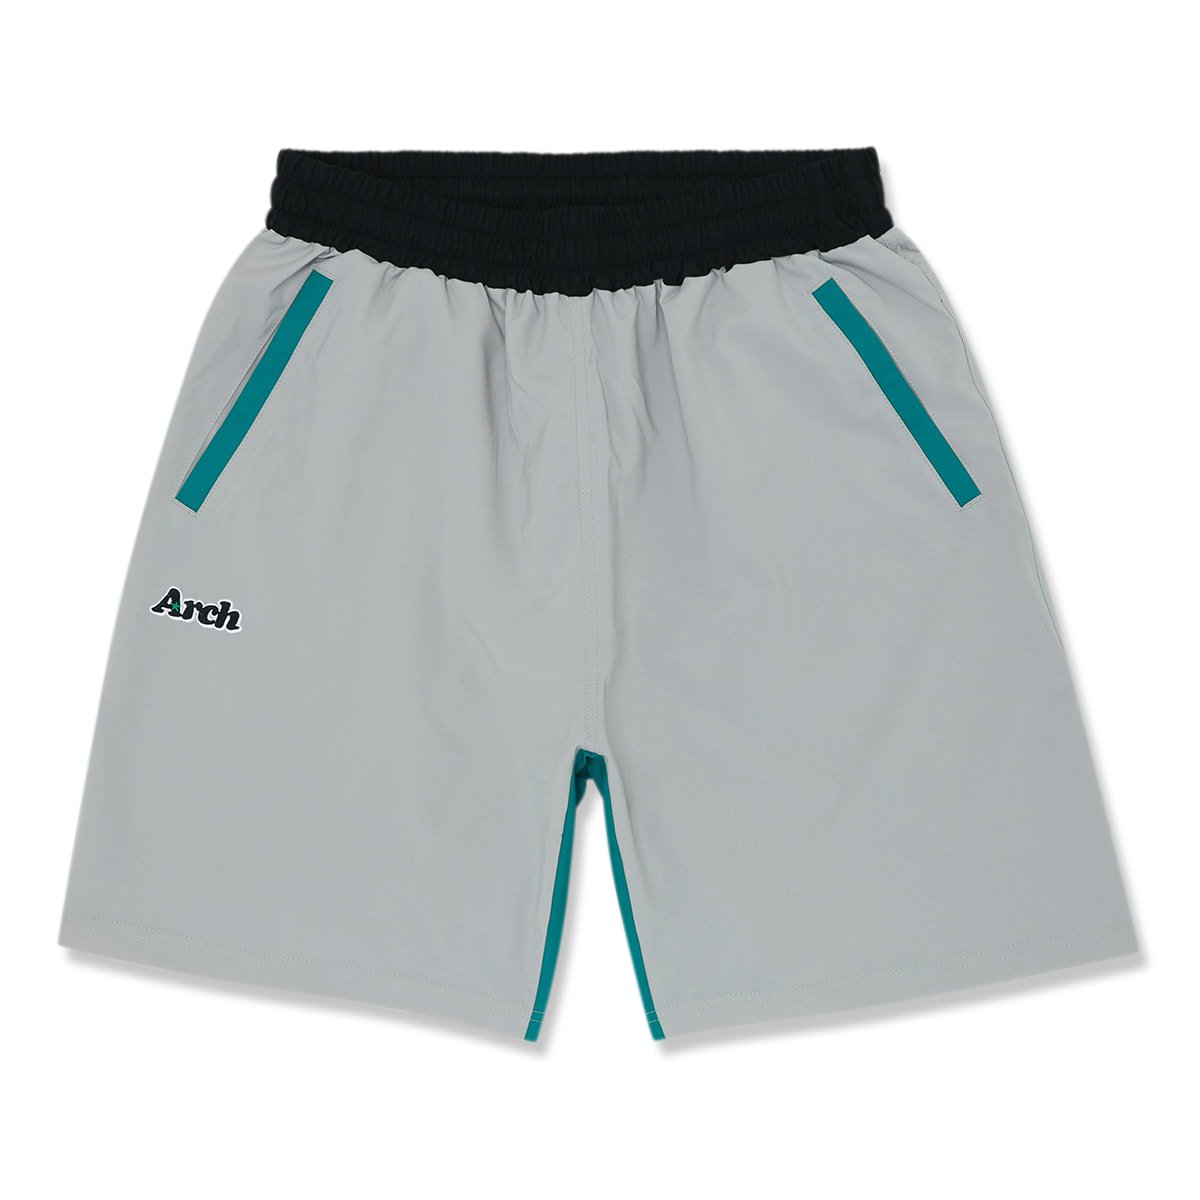 three-dimensional shorts【light gray】 - Arch ☆ アーチ 